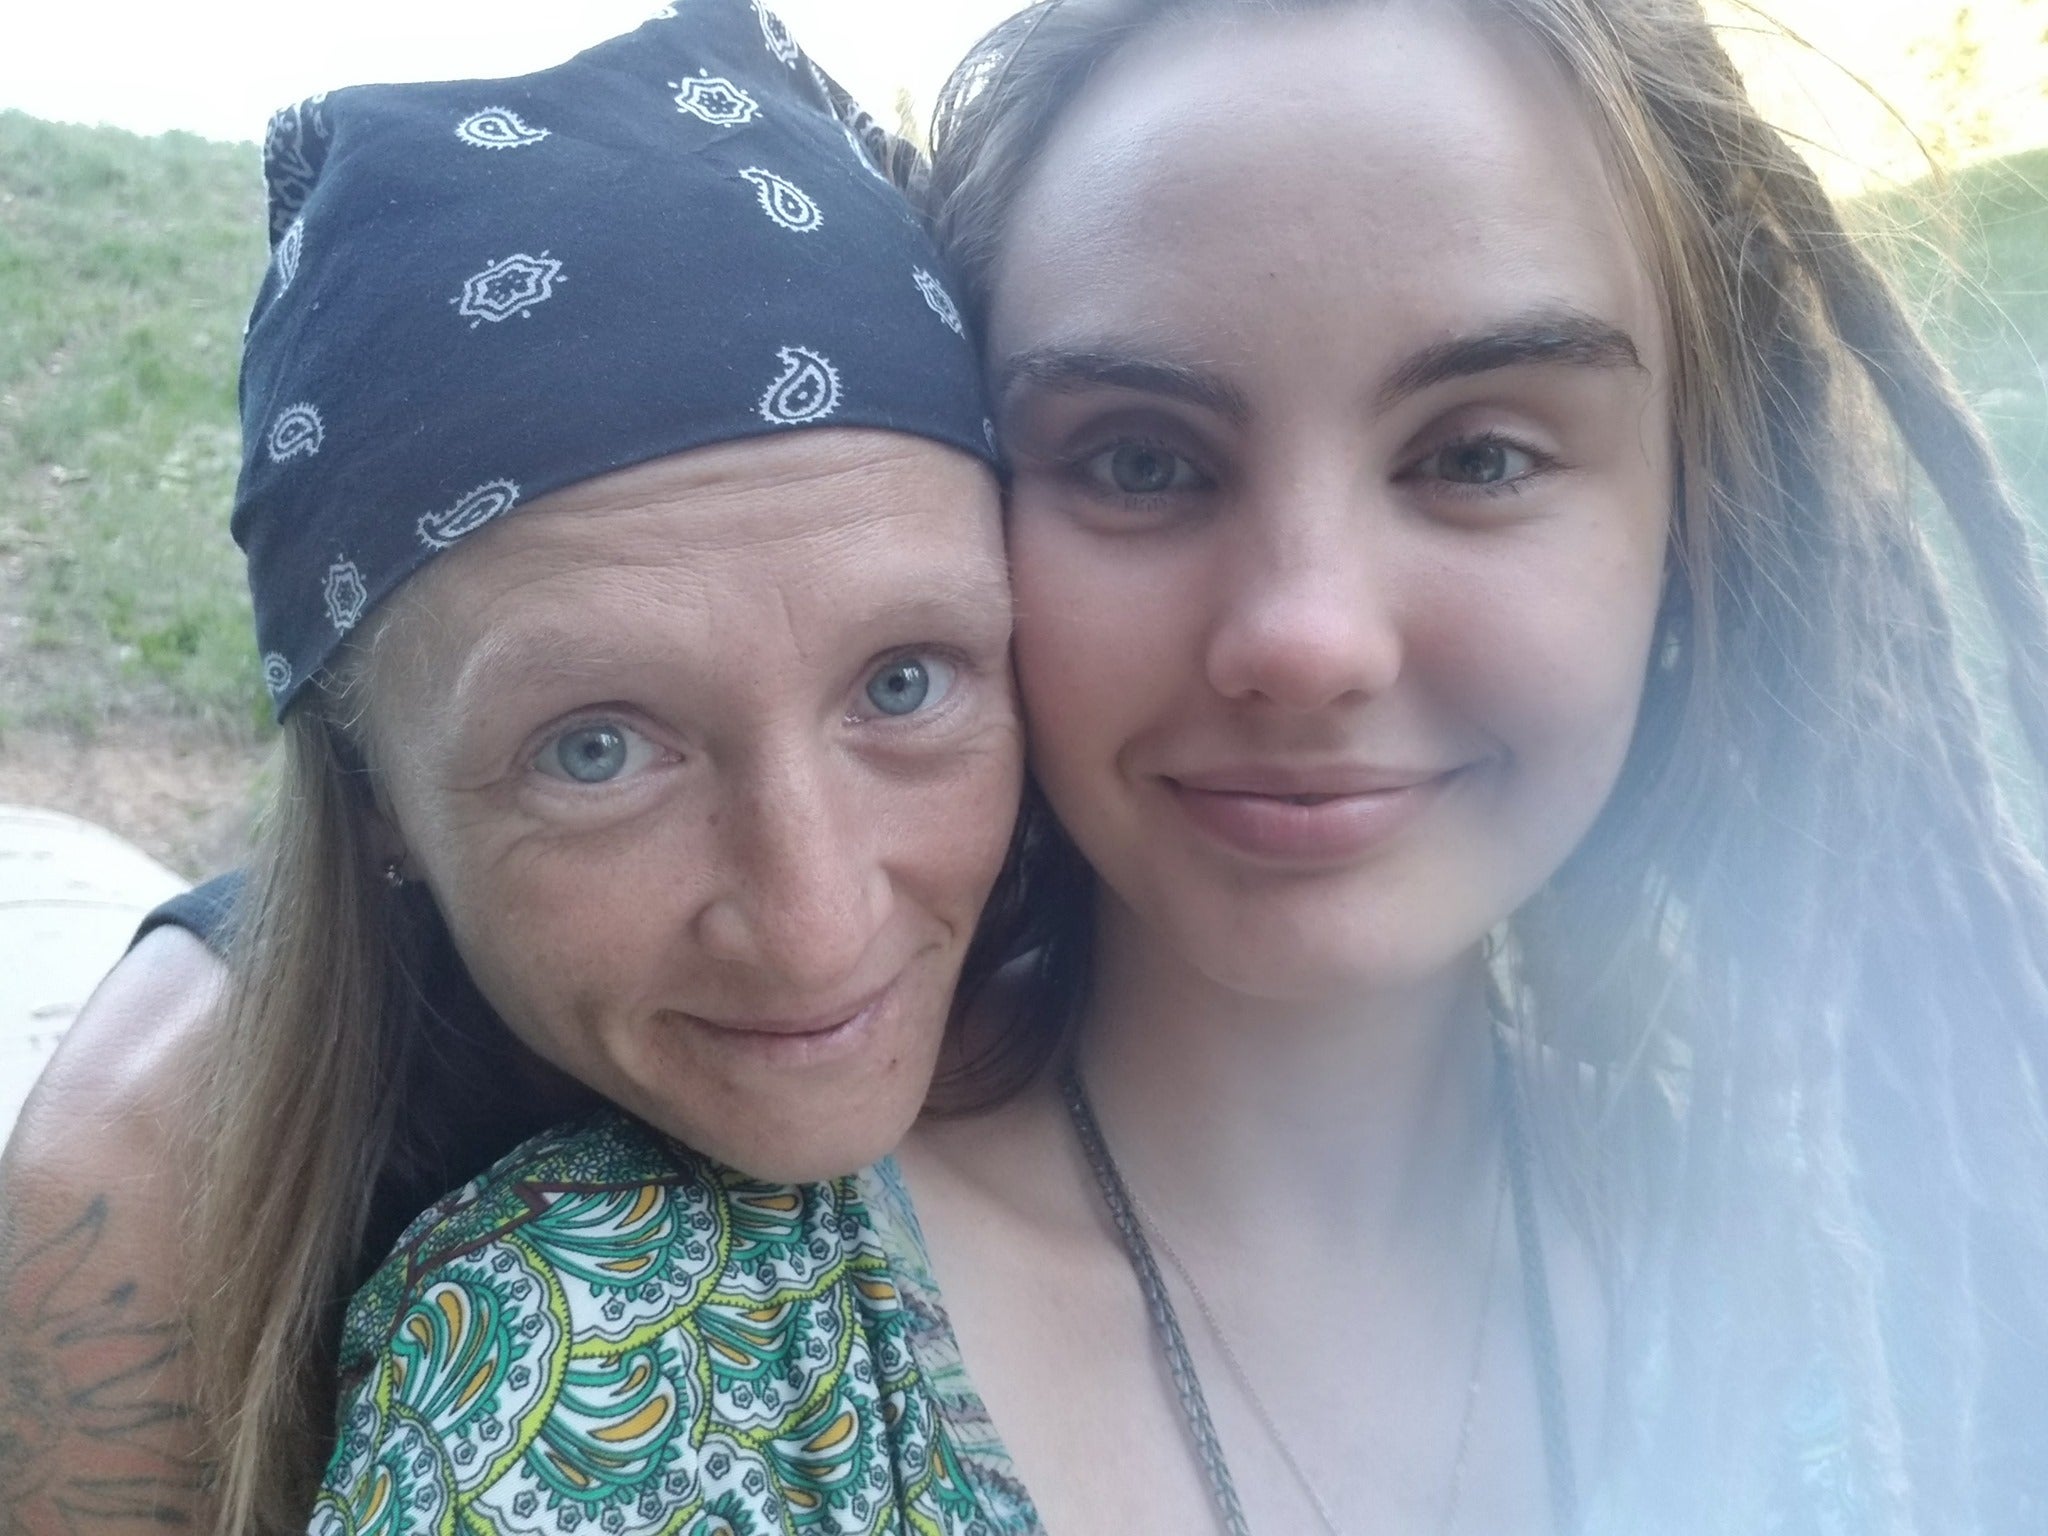 Crystal Turner (left) and Kylen Schulte were found in a campsite near Moab on 18 August